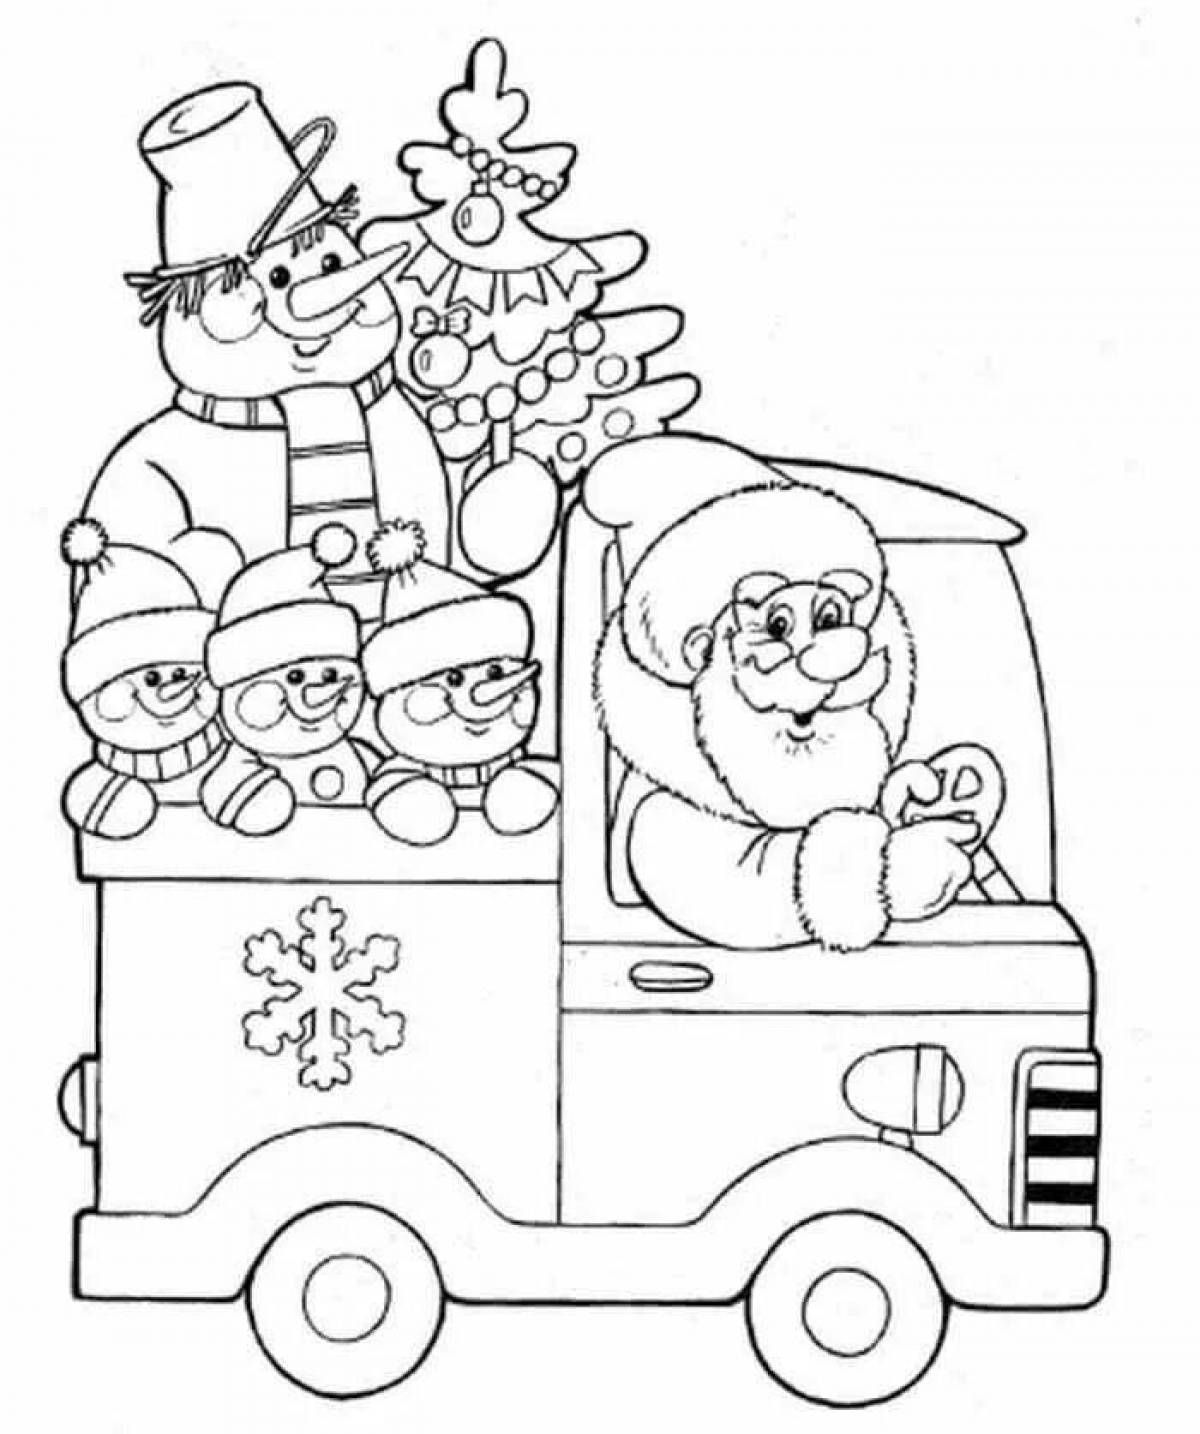 Holiday snowman coloring page